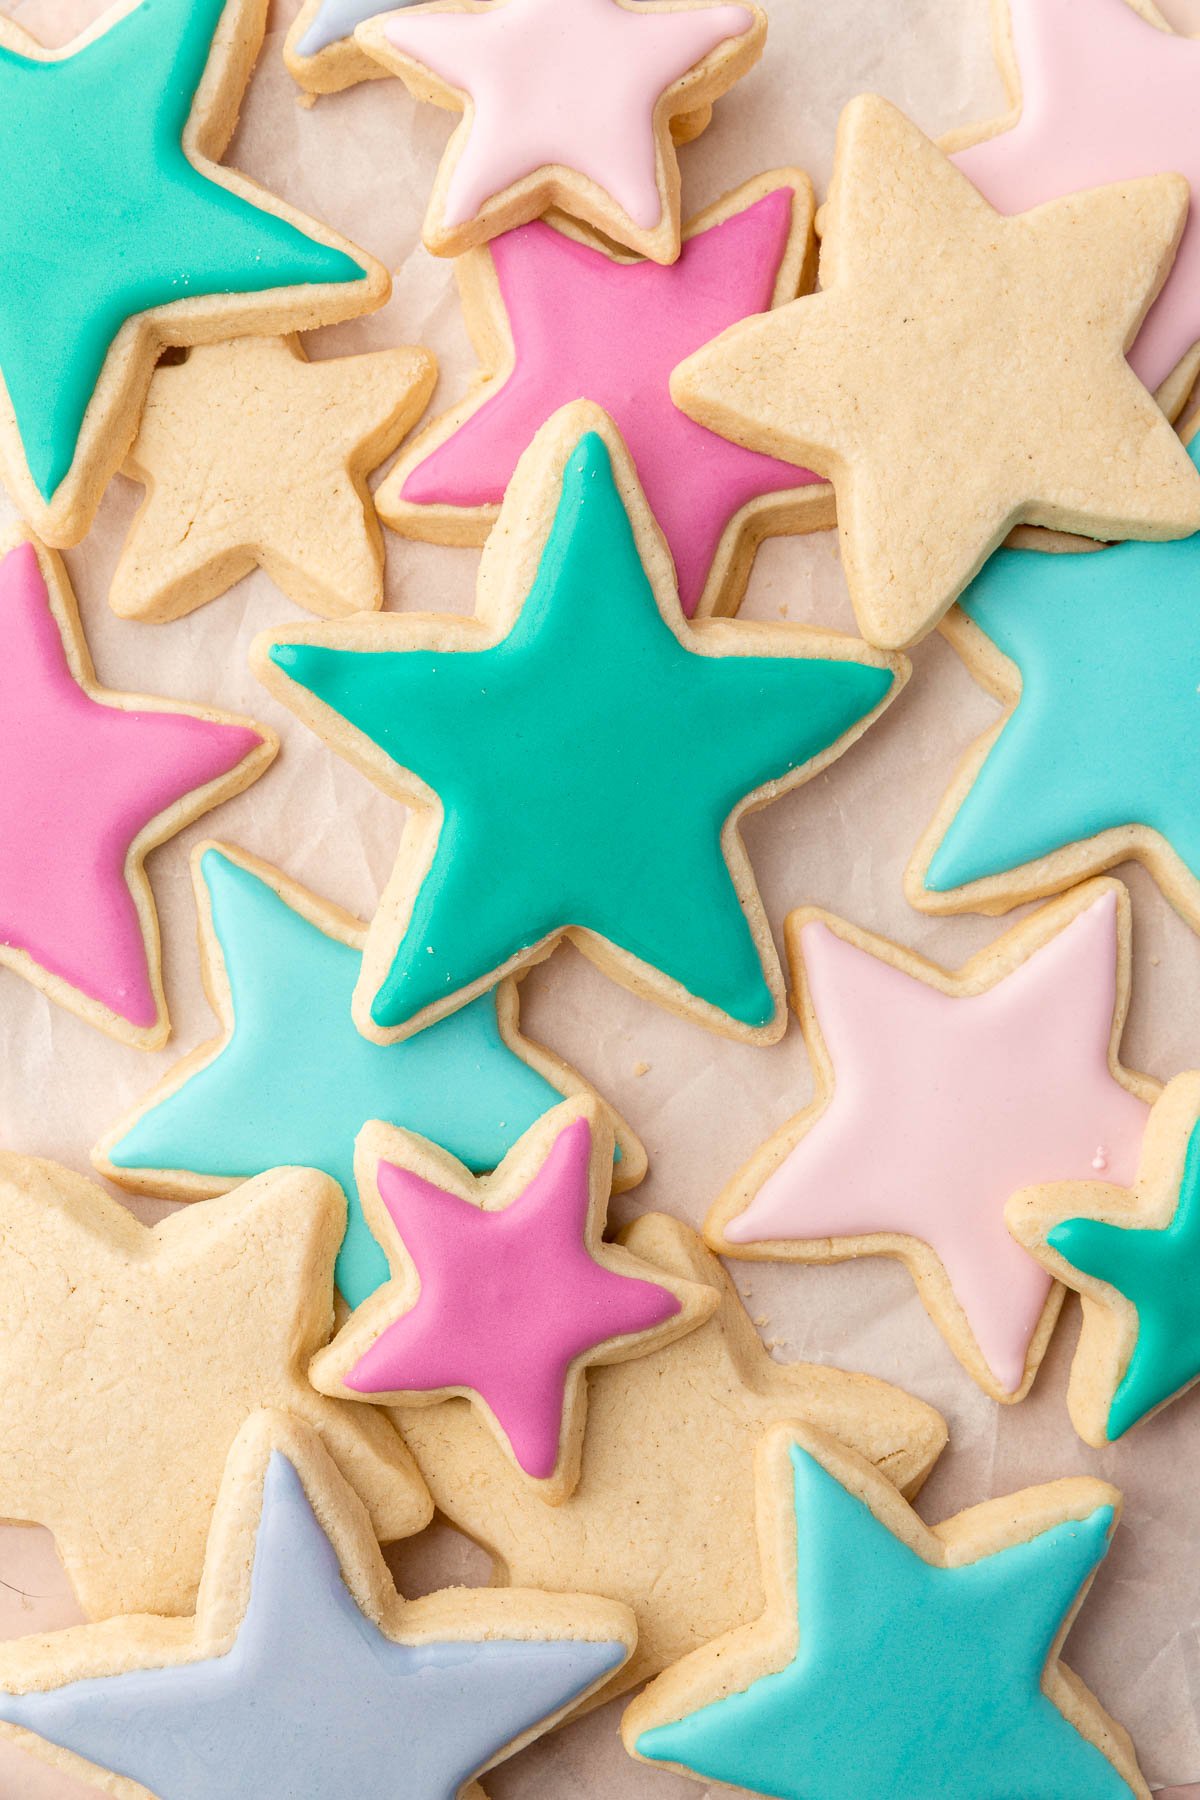 An overhead view of decorated and undecorated gluten free sugar cookies shaped as stars, some with blue, green, fuchsia and light pink icing.